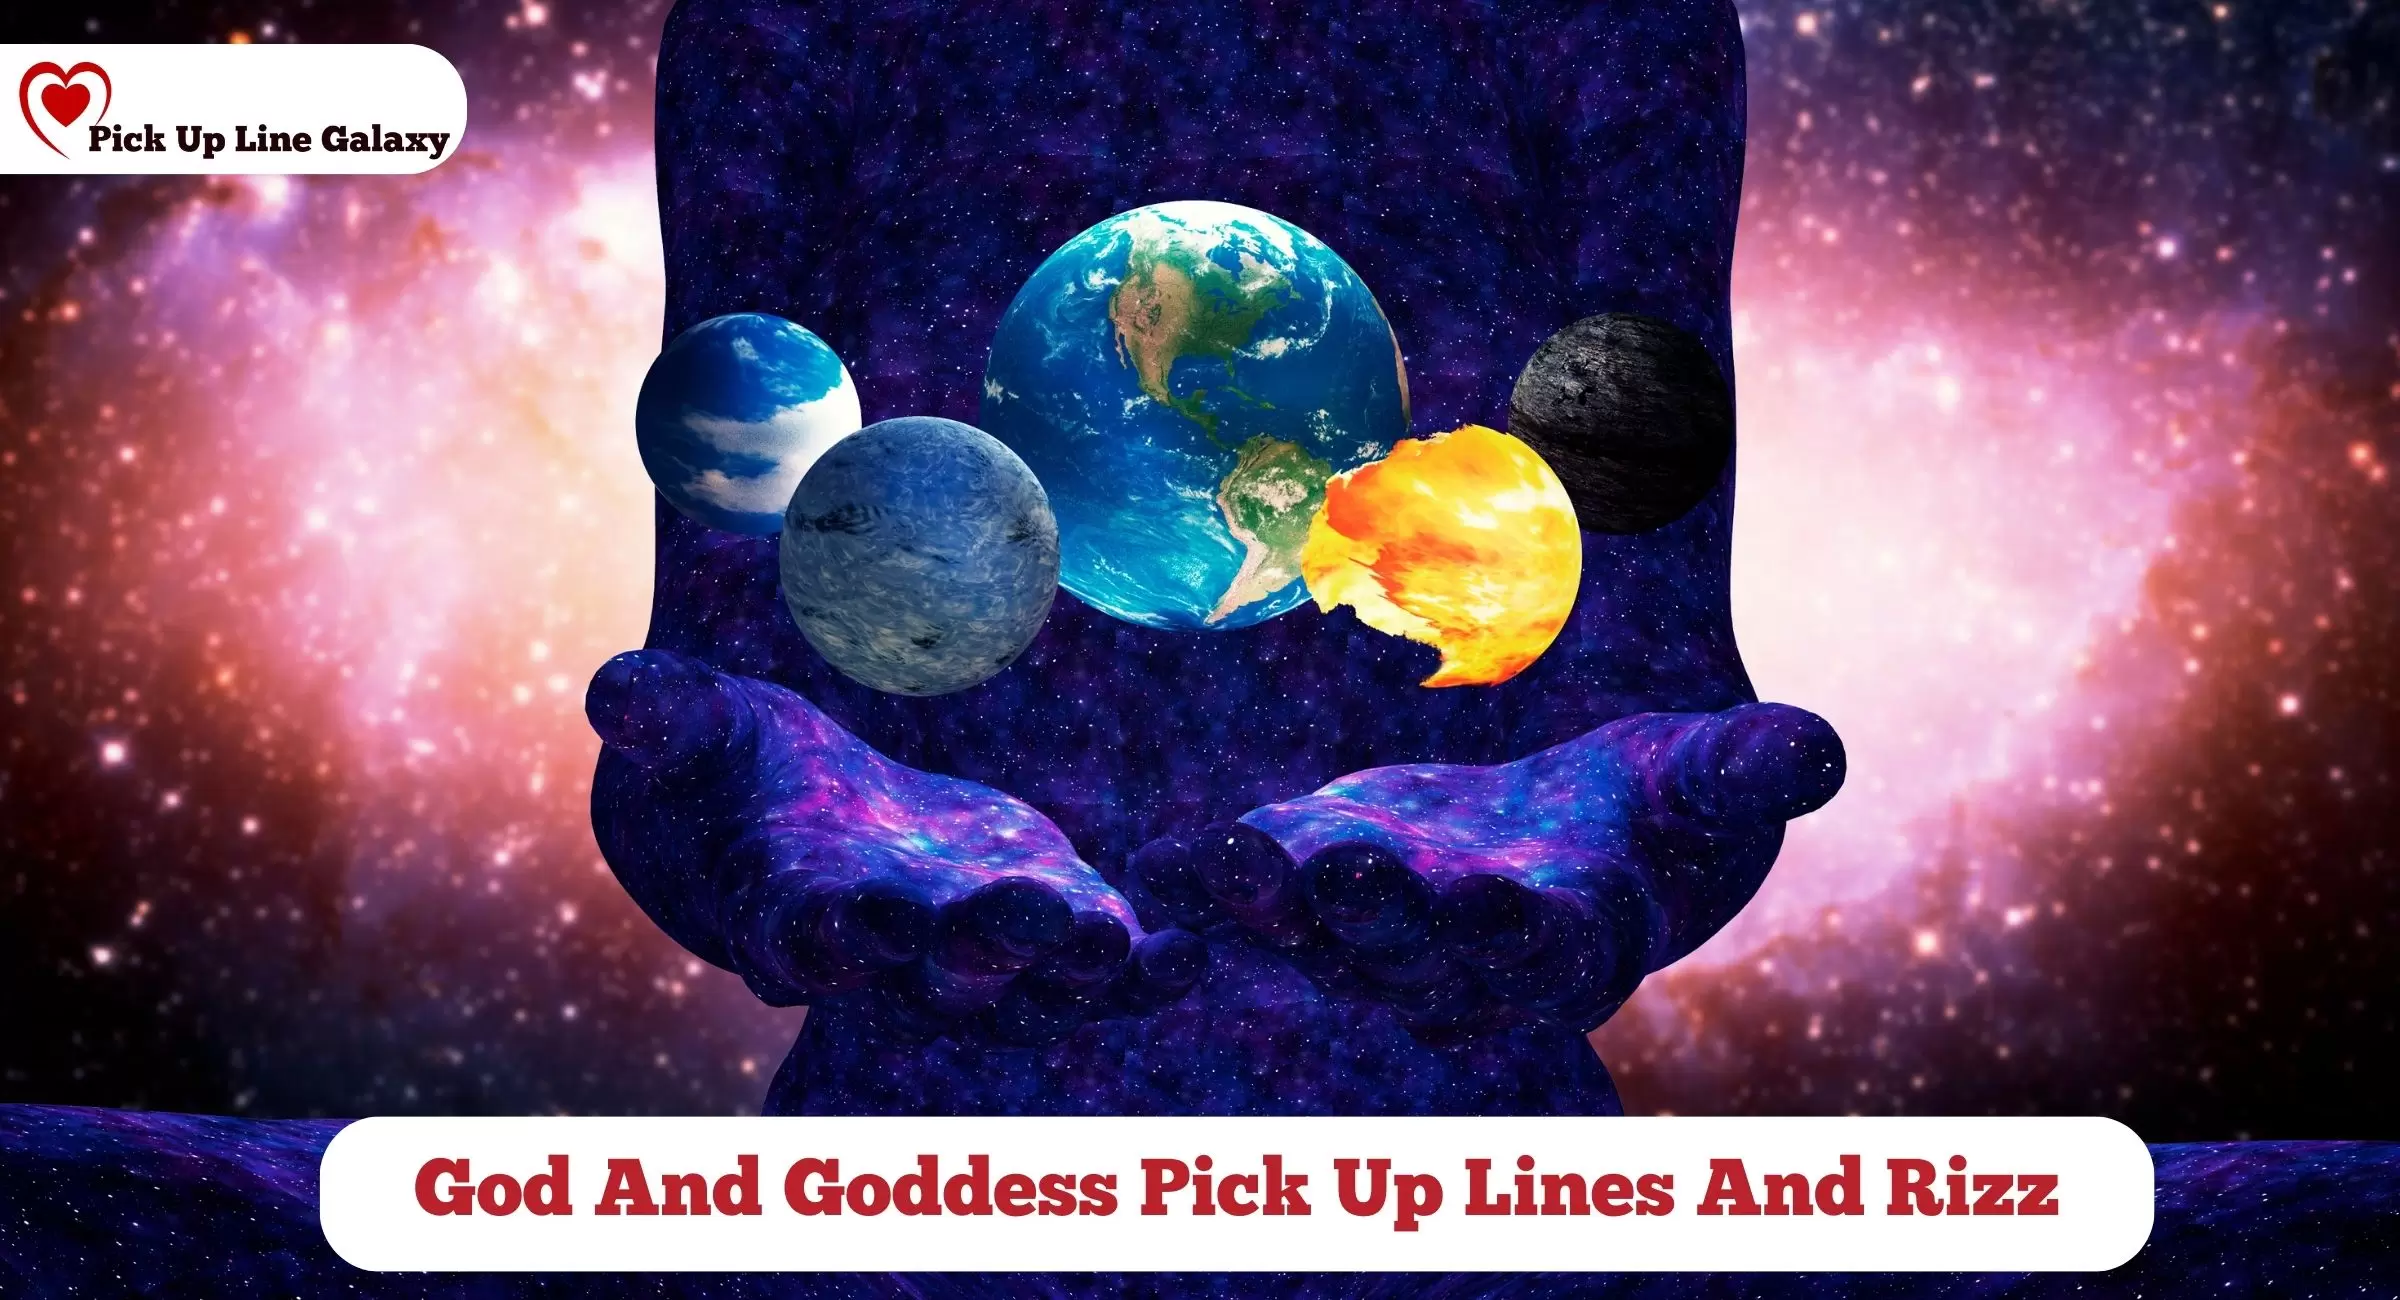 God And Goddess Pick Up Lines And Rizz